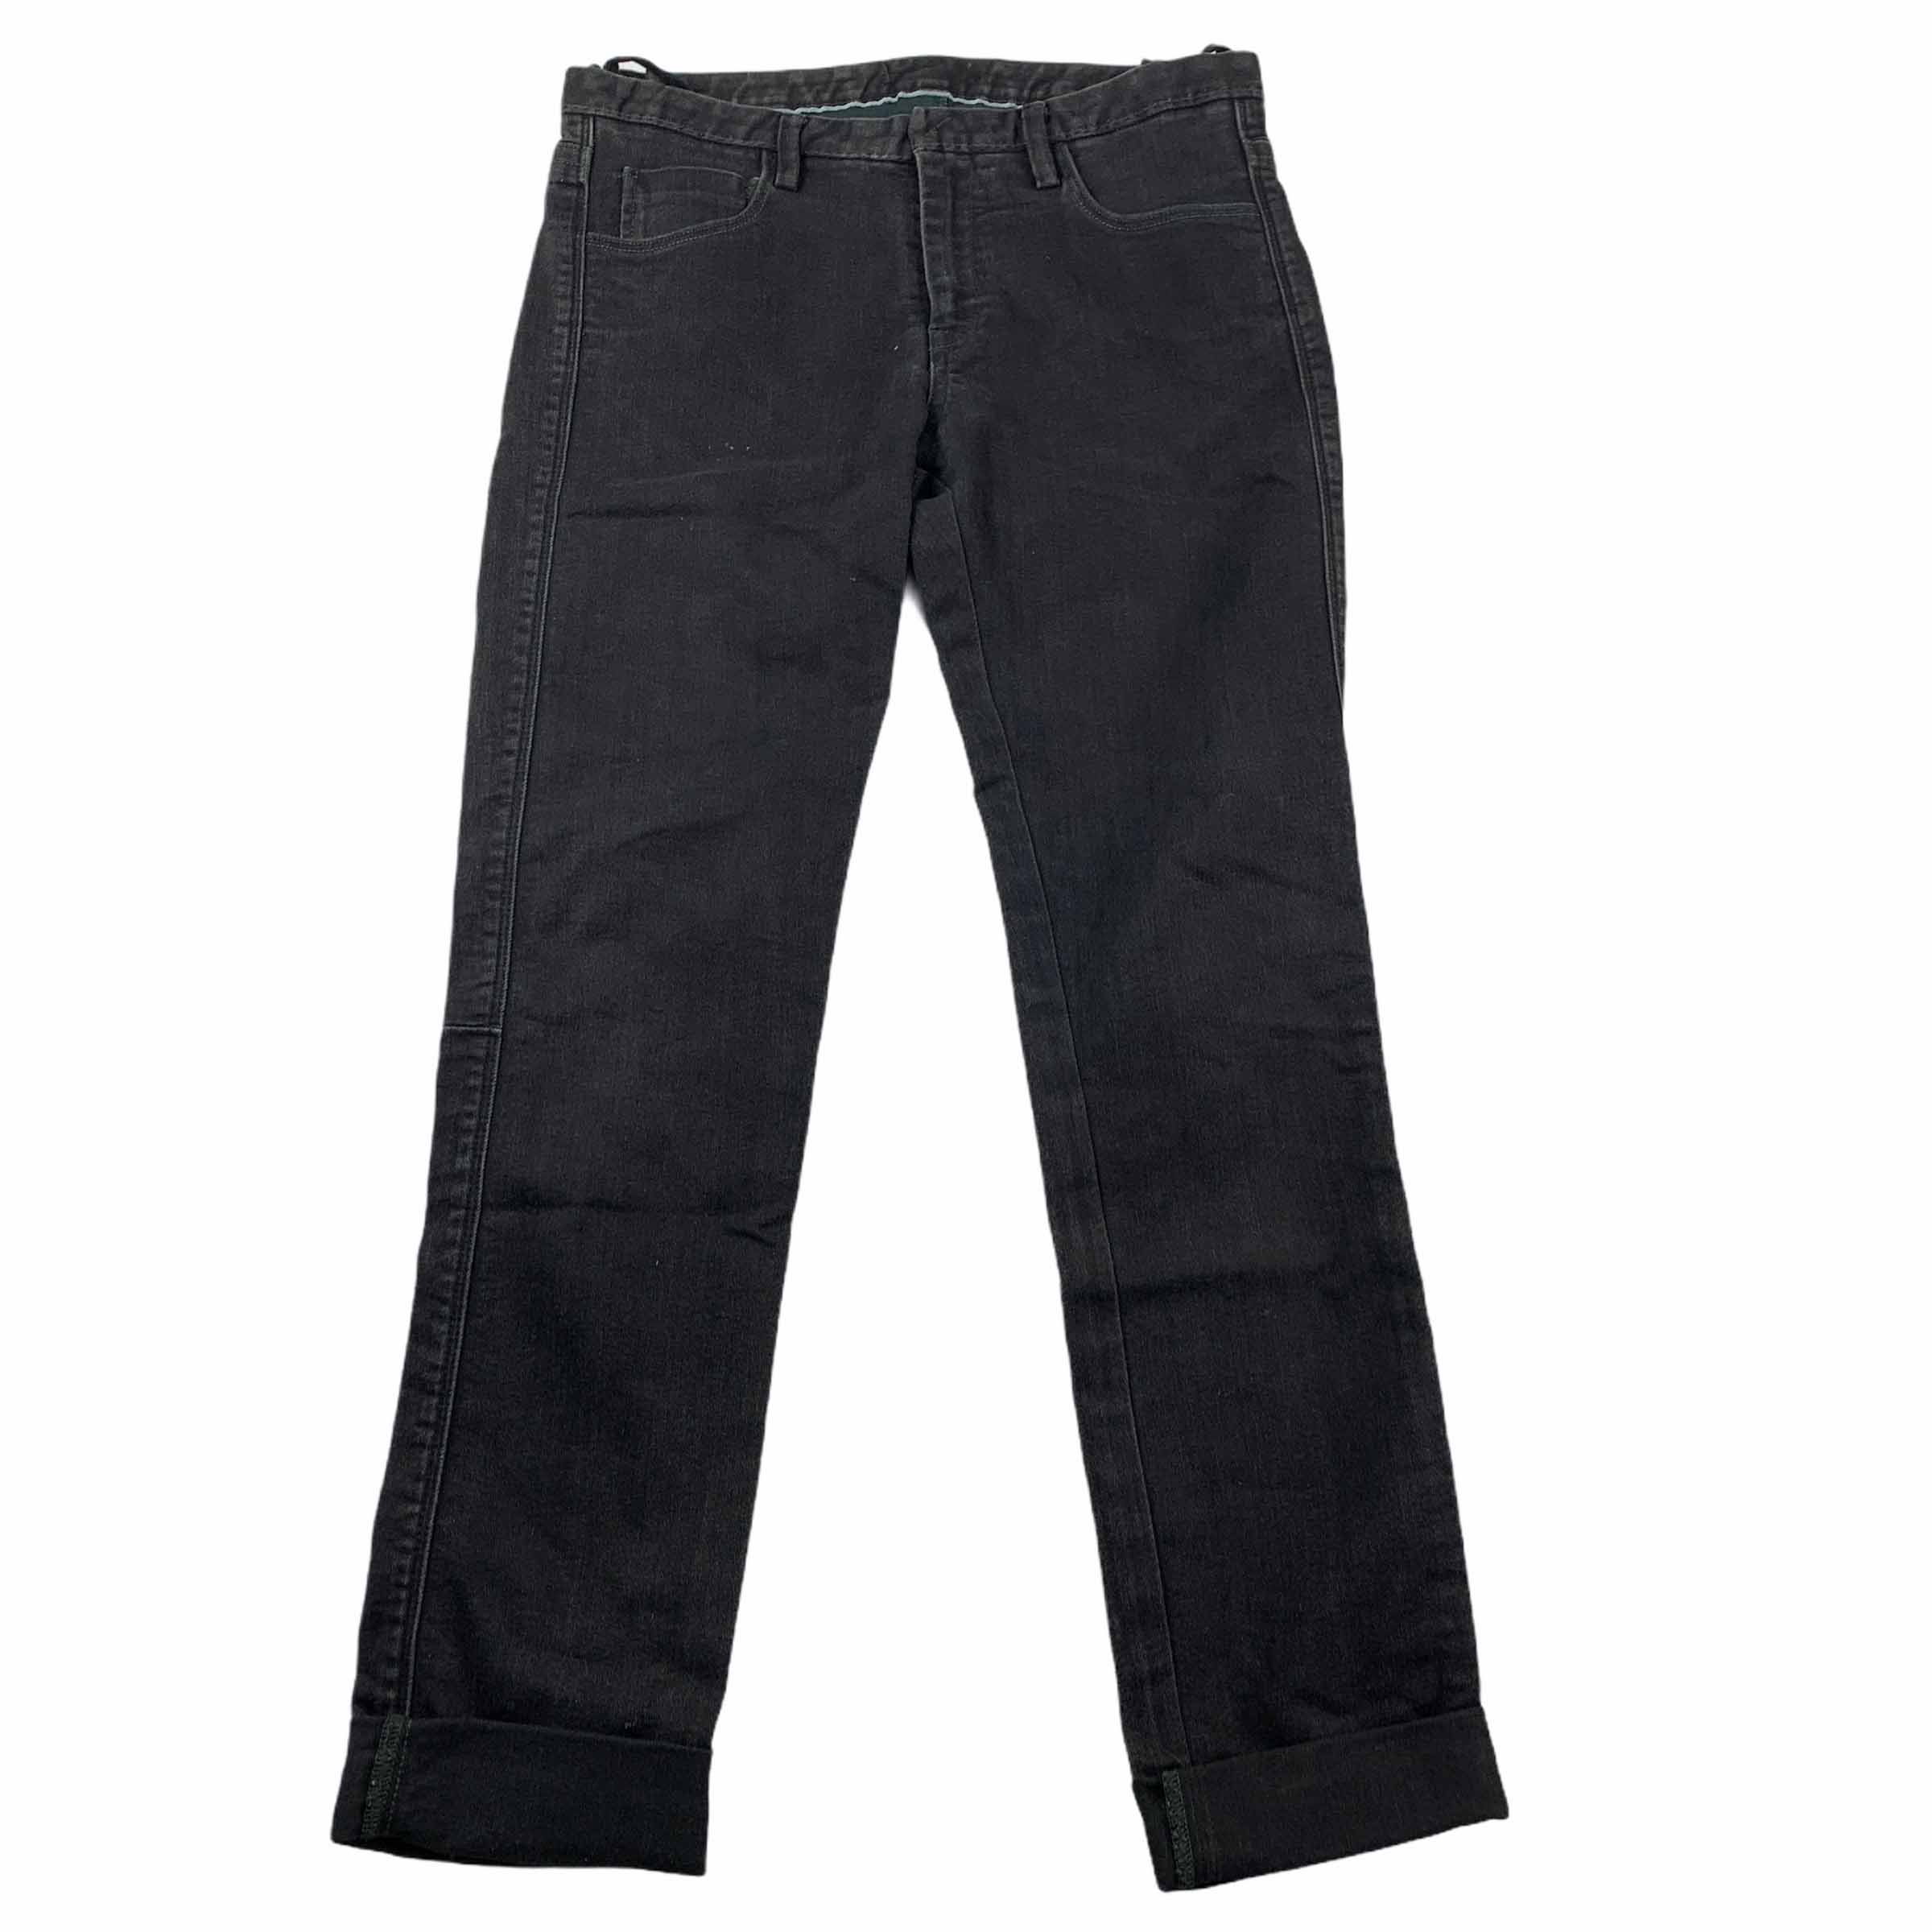 [Costume National] Dart Point Black Jeans - Size 46